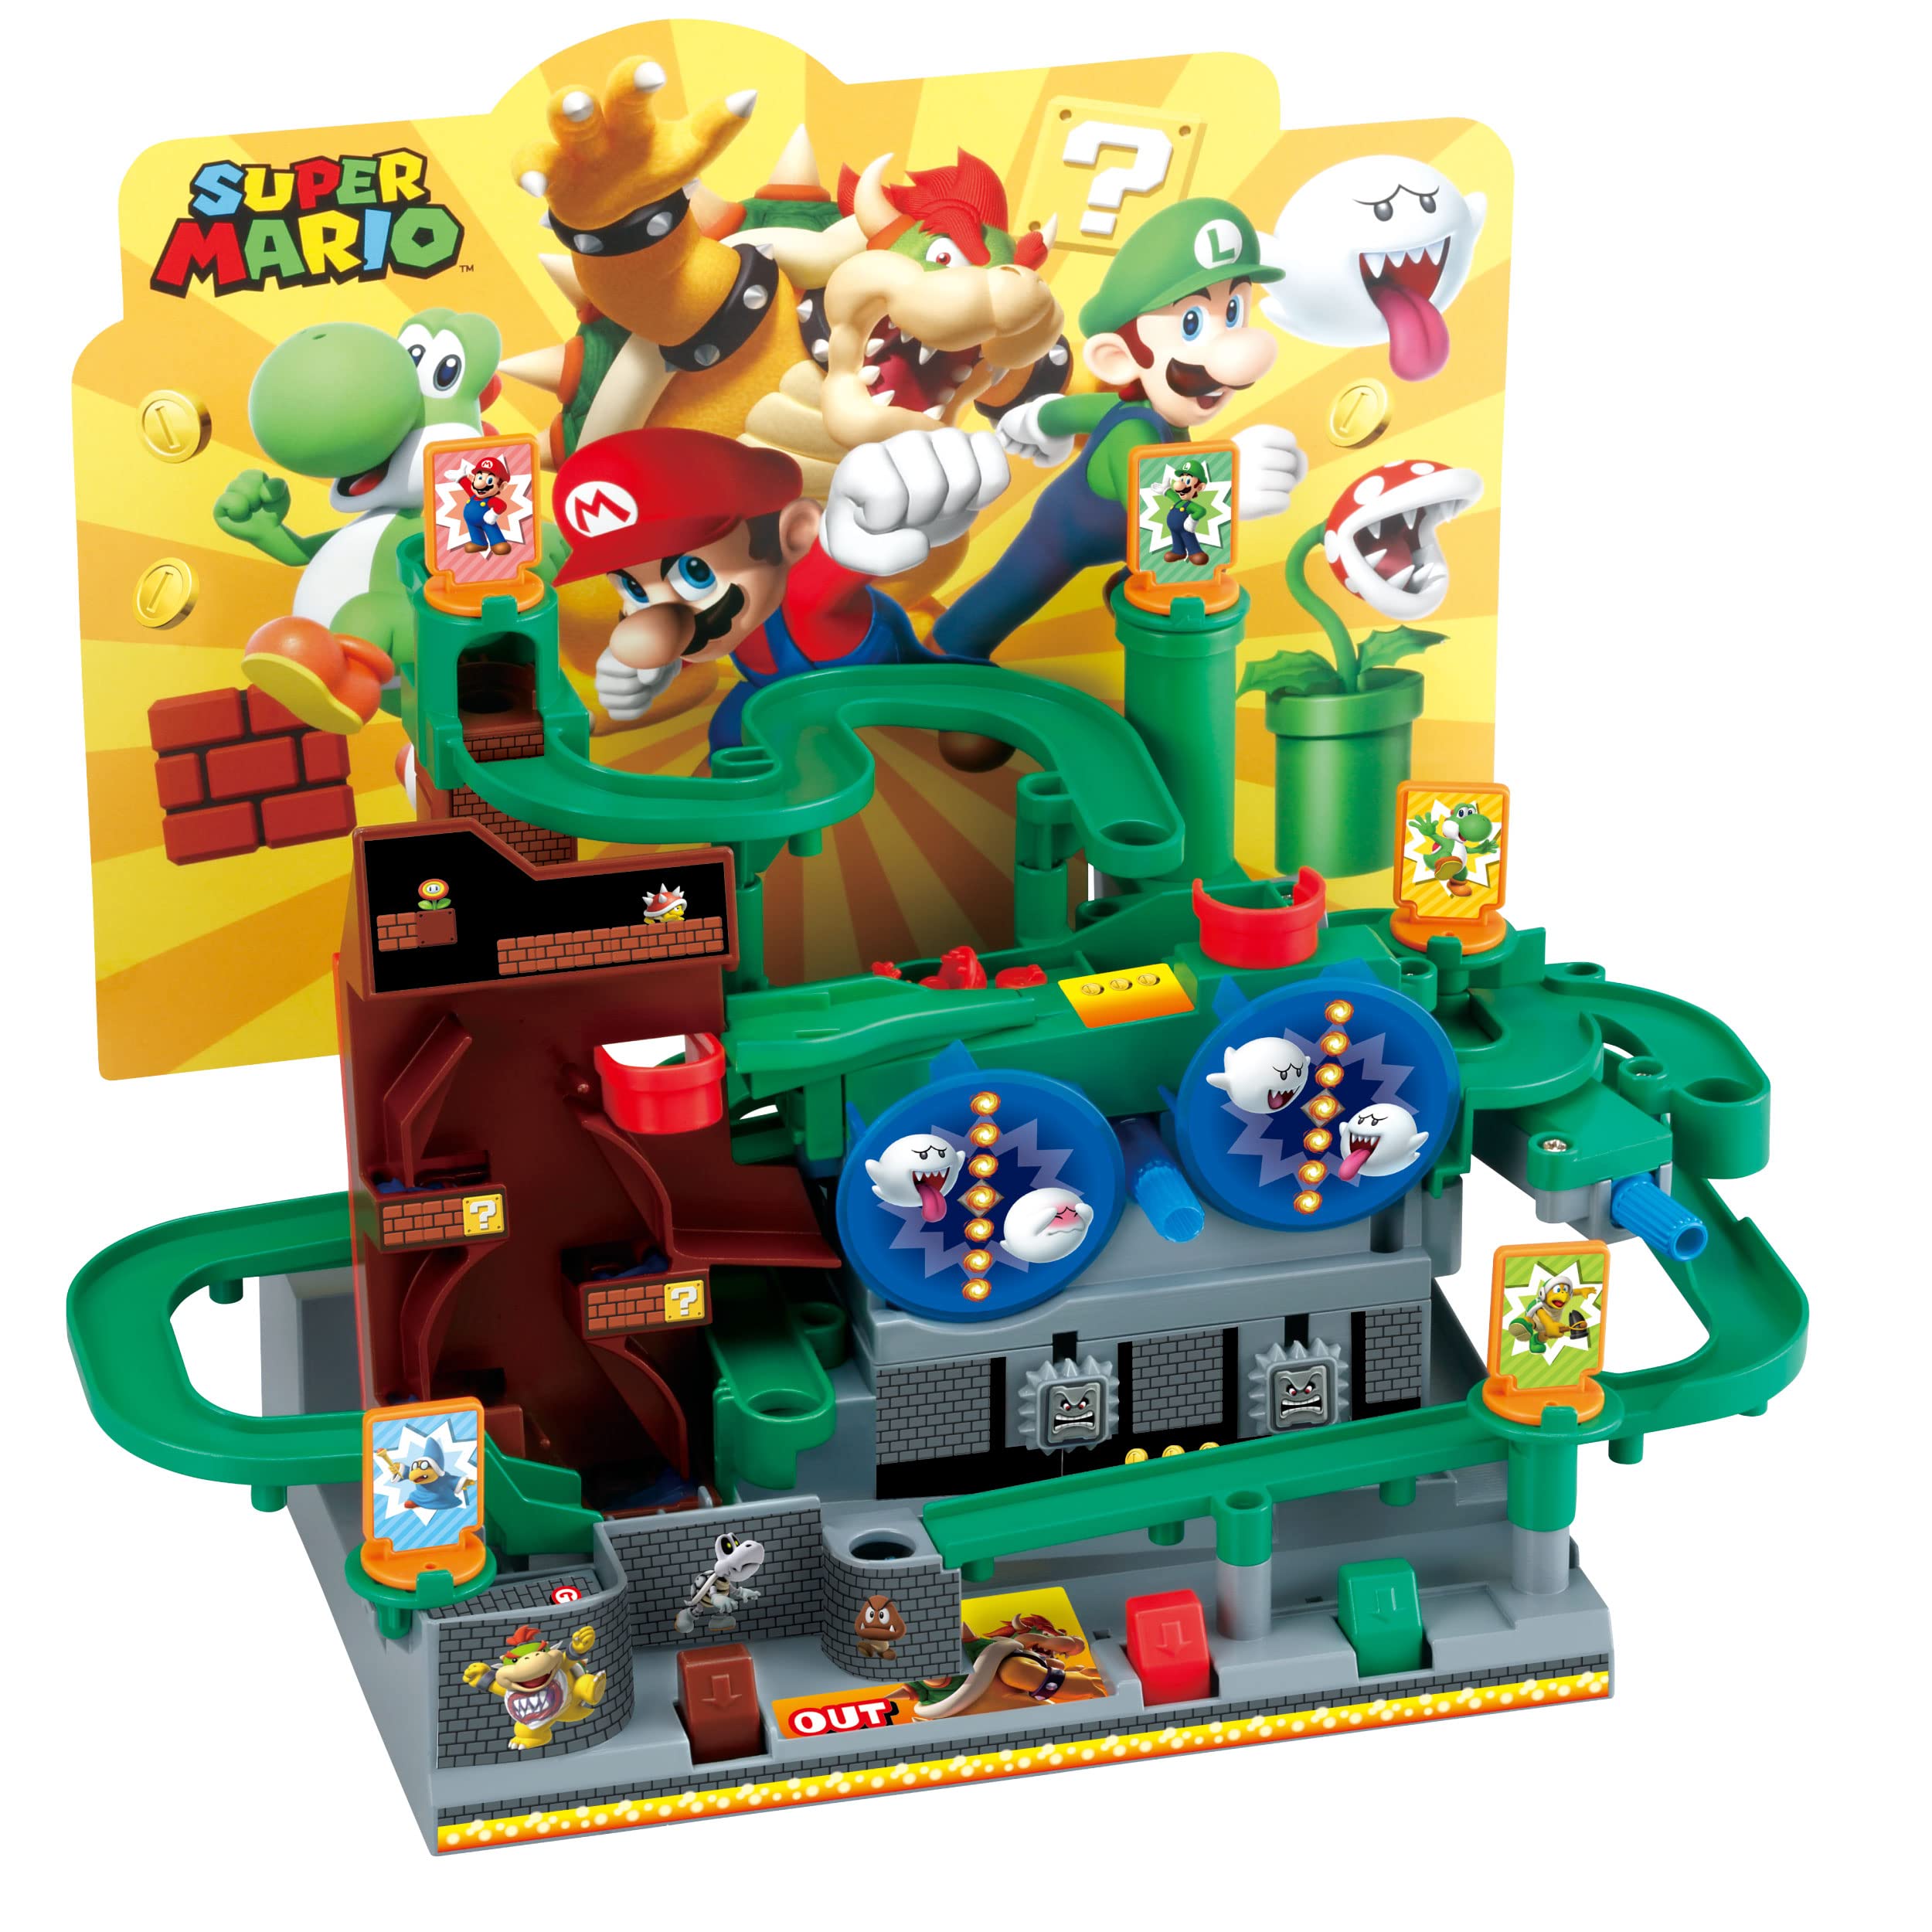 EPOCH Super Mario Adventure Game DX, Tabletop Skill and Action Game with Collectible Action Figures